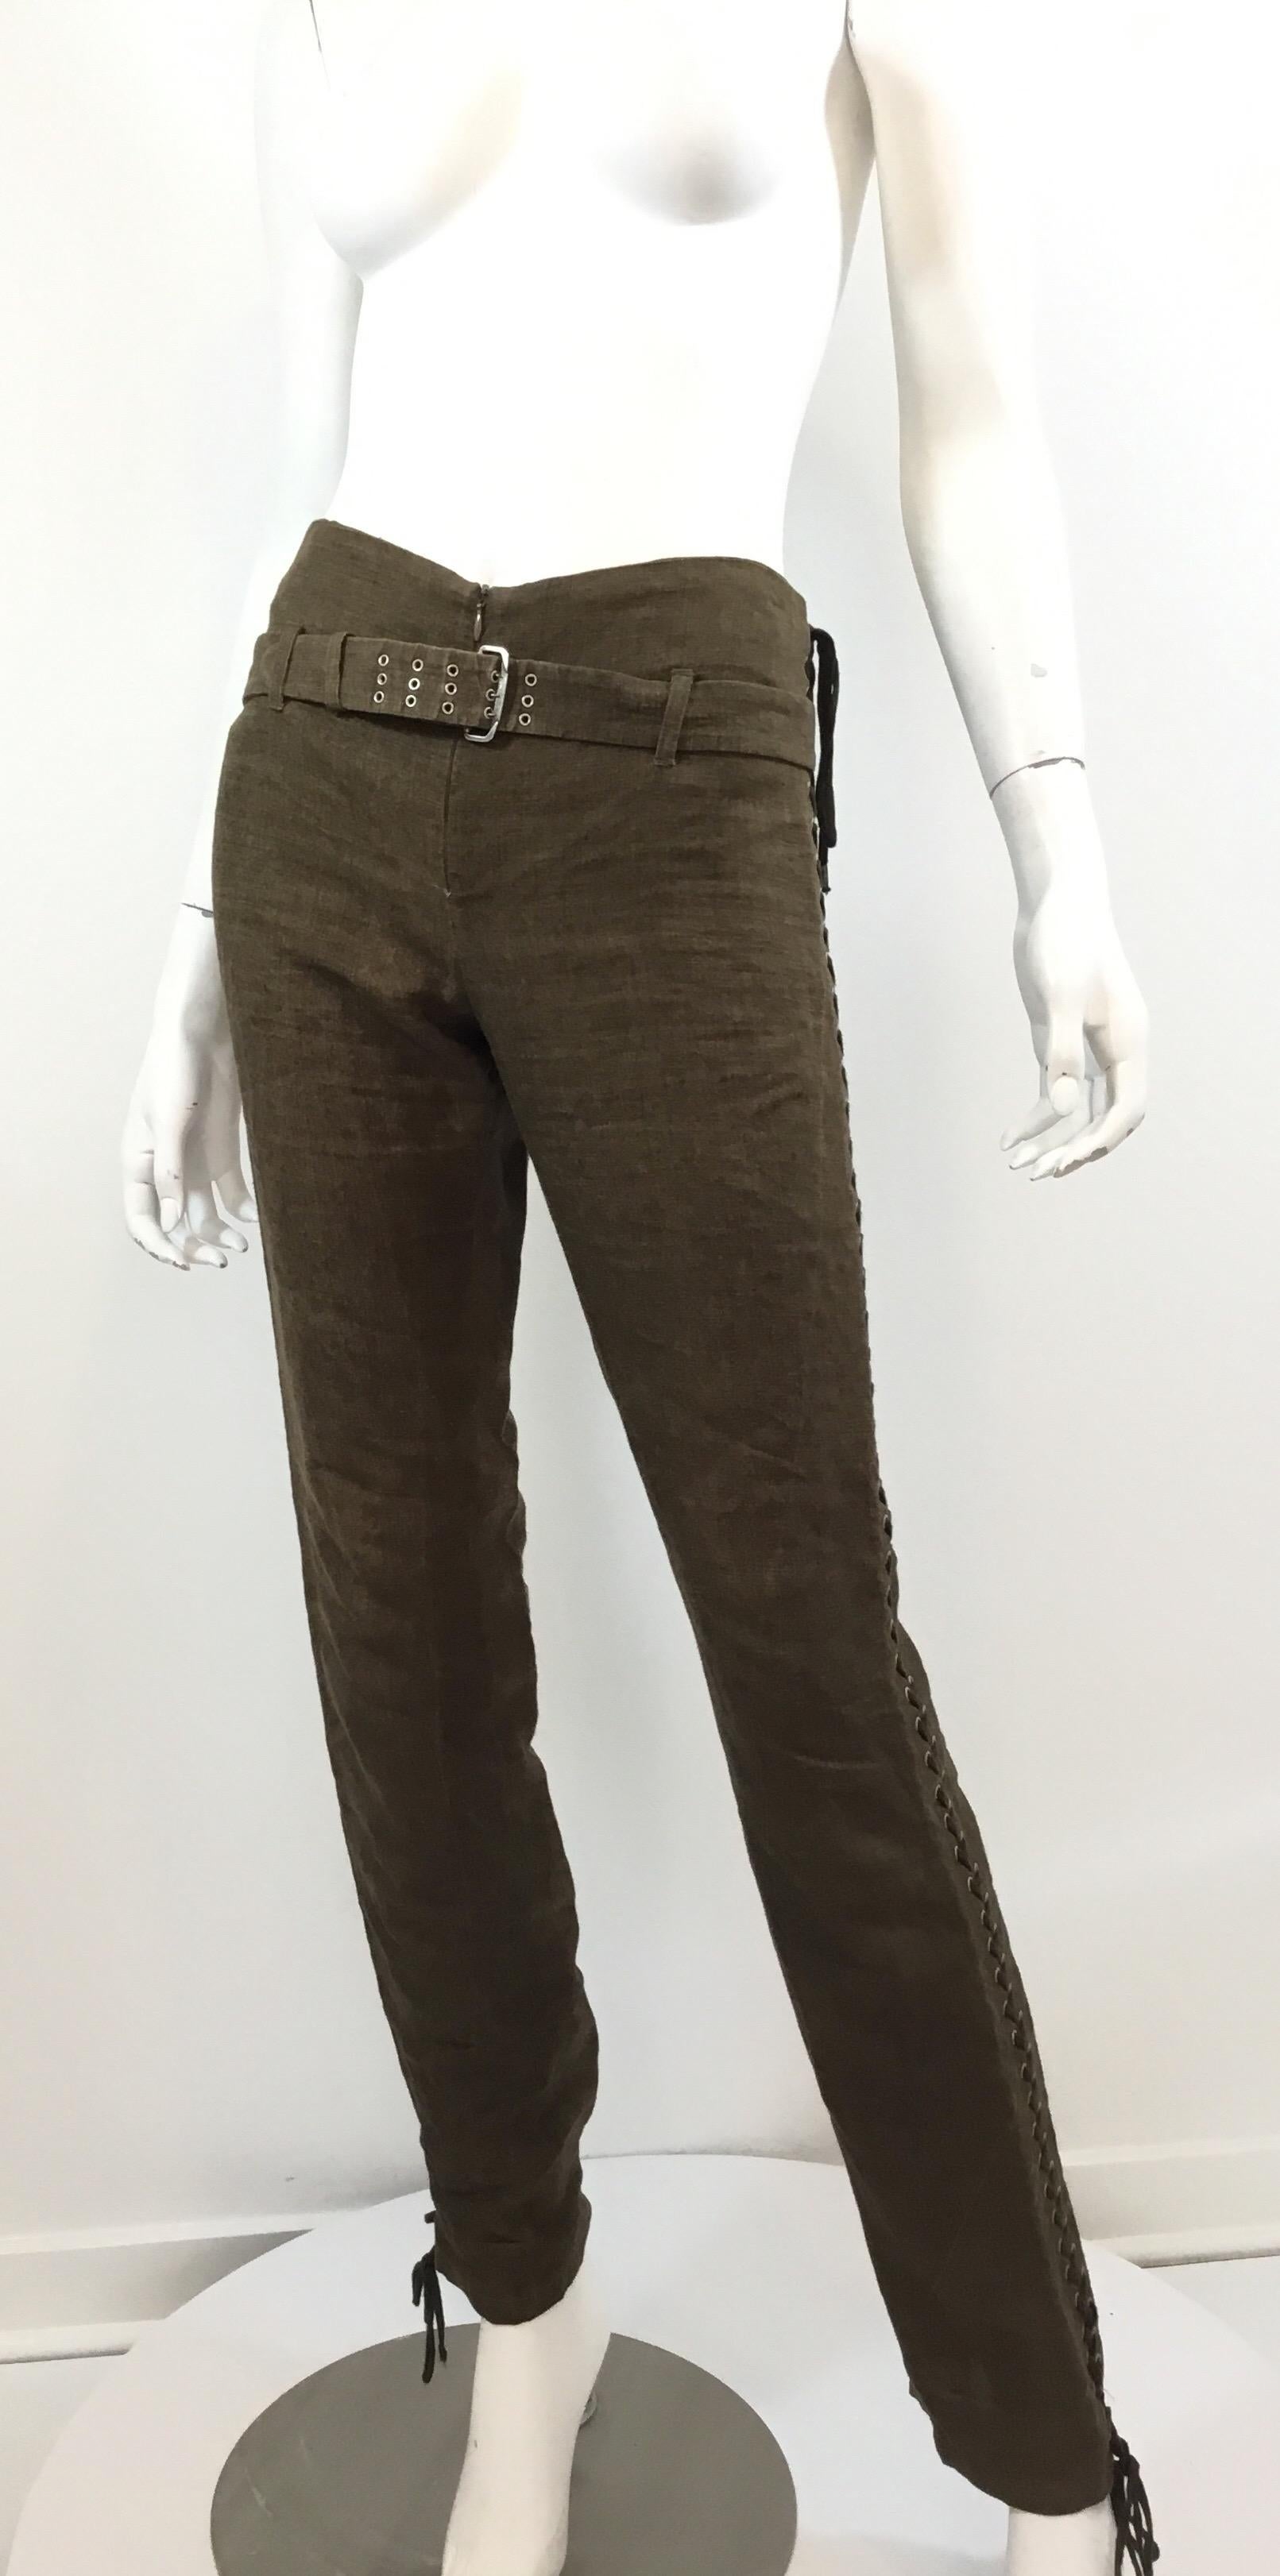 Jean Paul Gaultier linen pants featured in a dark green/brown color with a lace up and rivet panel down the sides. Pants have a zipper front and belt fastening. 100% linen, size 6, made in Italy.

Waist 30”, hips 32”, inseam 32”, rise 9”, length